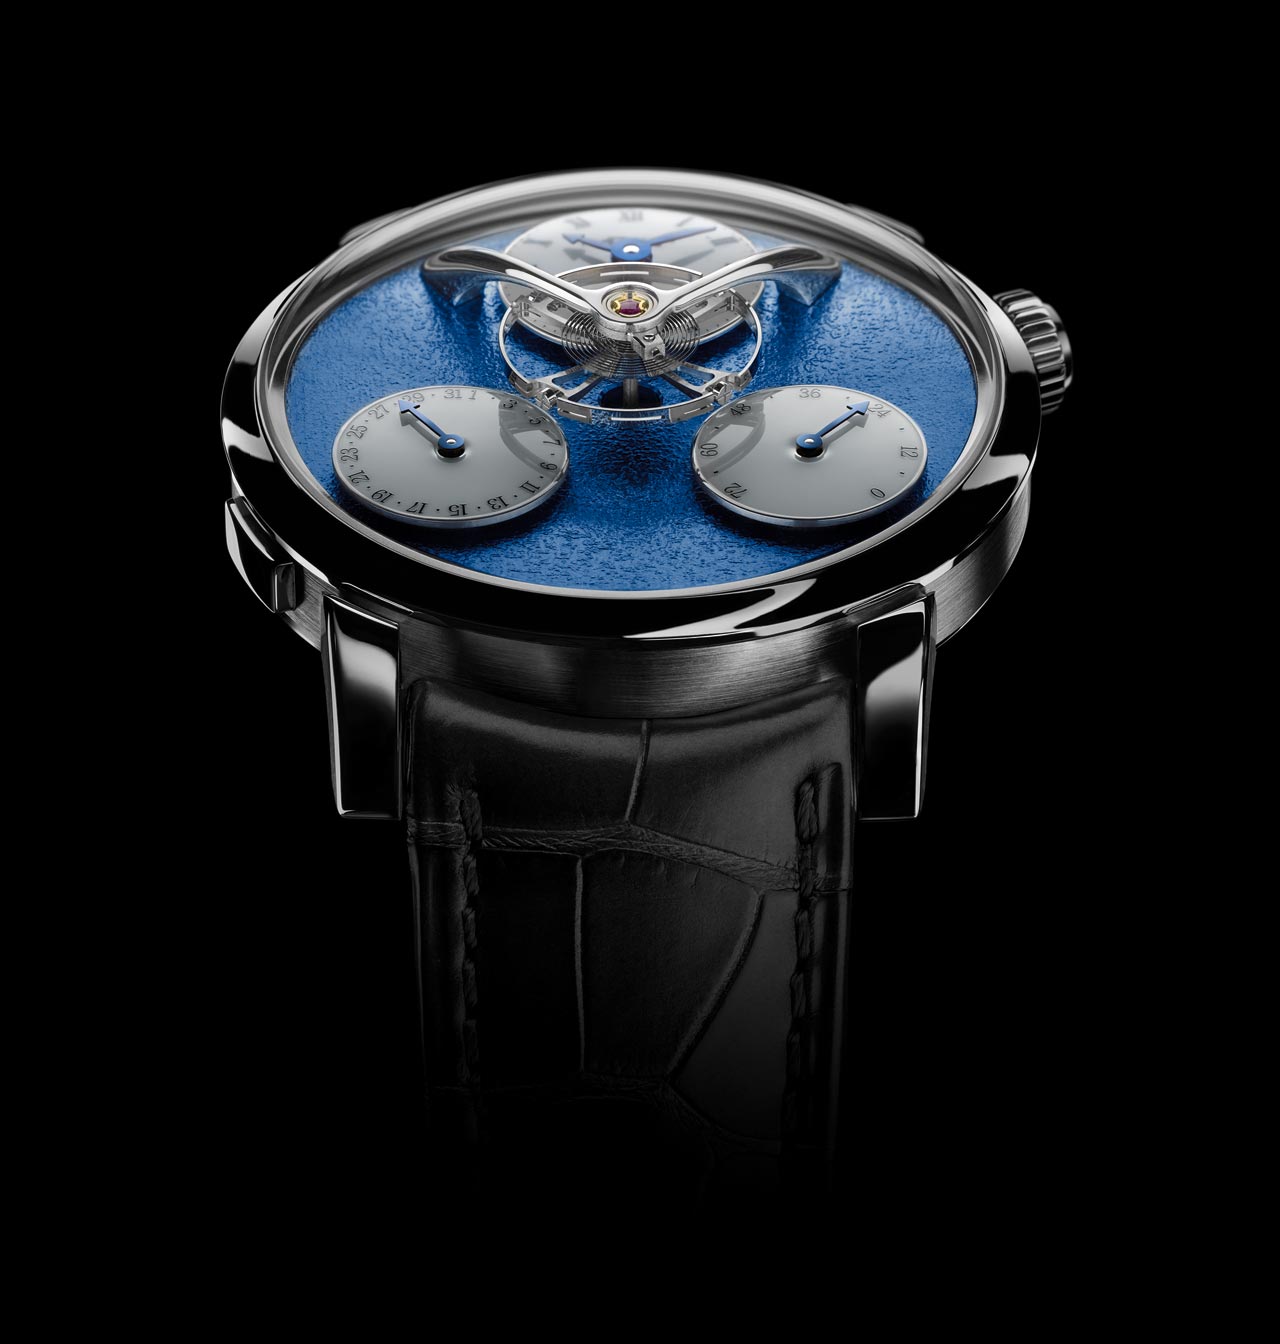 MB&F - Legacy Machine Split Escapement | Time and Watches | The watch blog